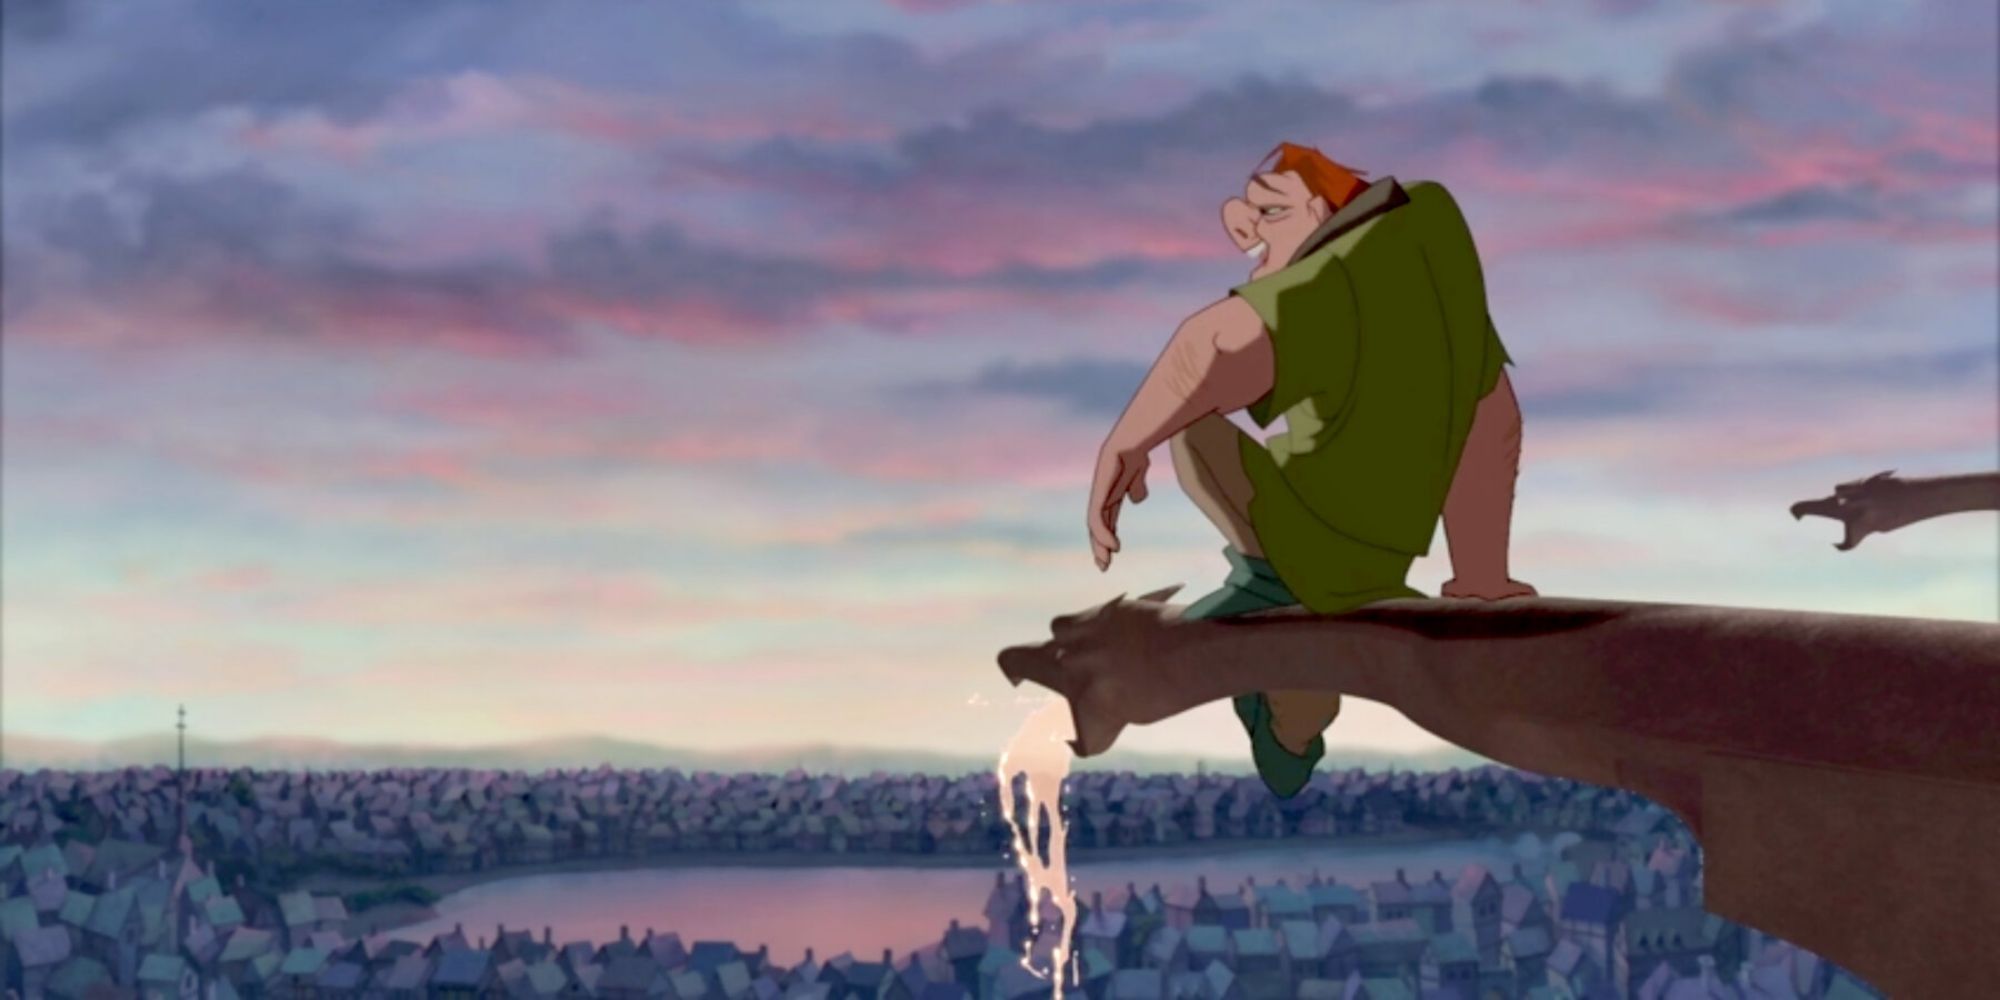 Quasimodo sitting on a gargoyle overlooking Paris in The Hunchback of Notre Dame